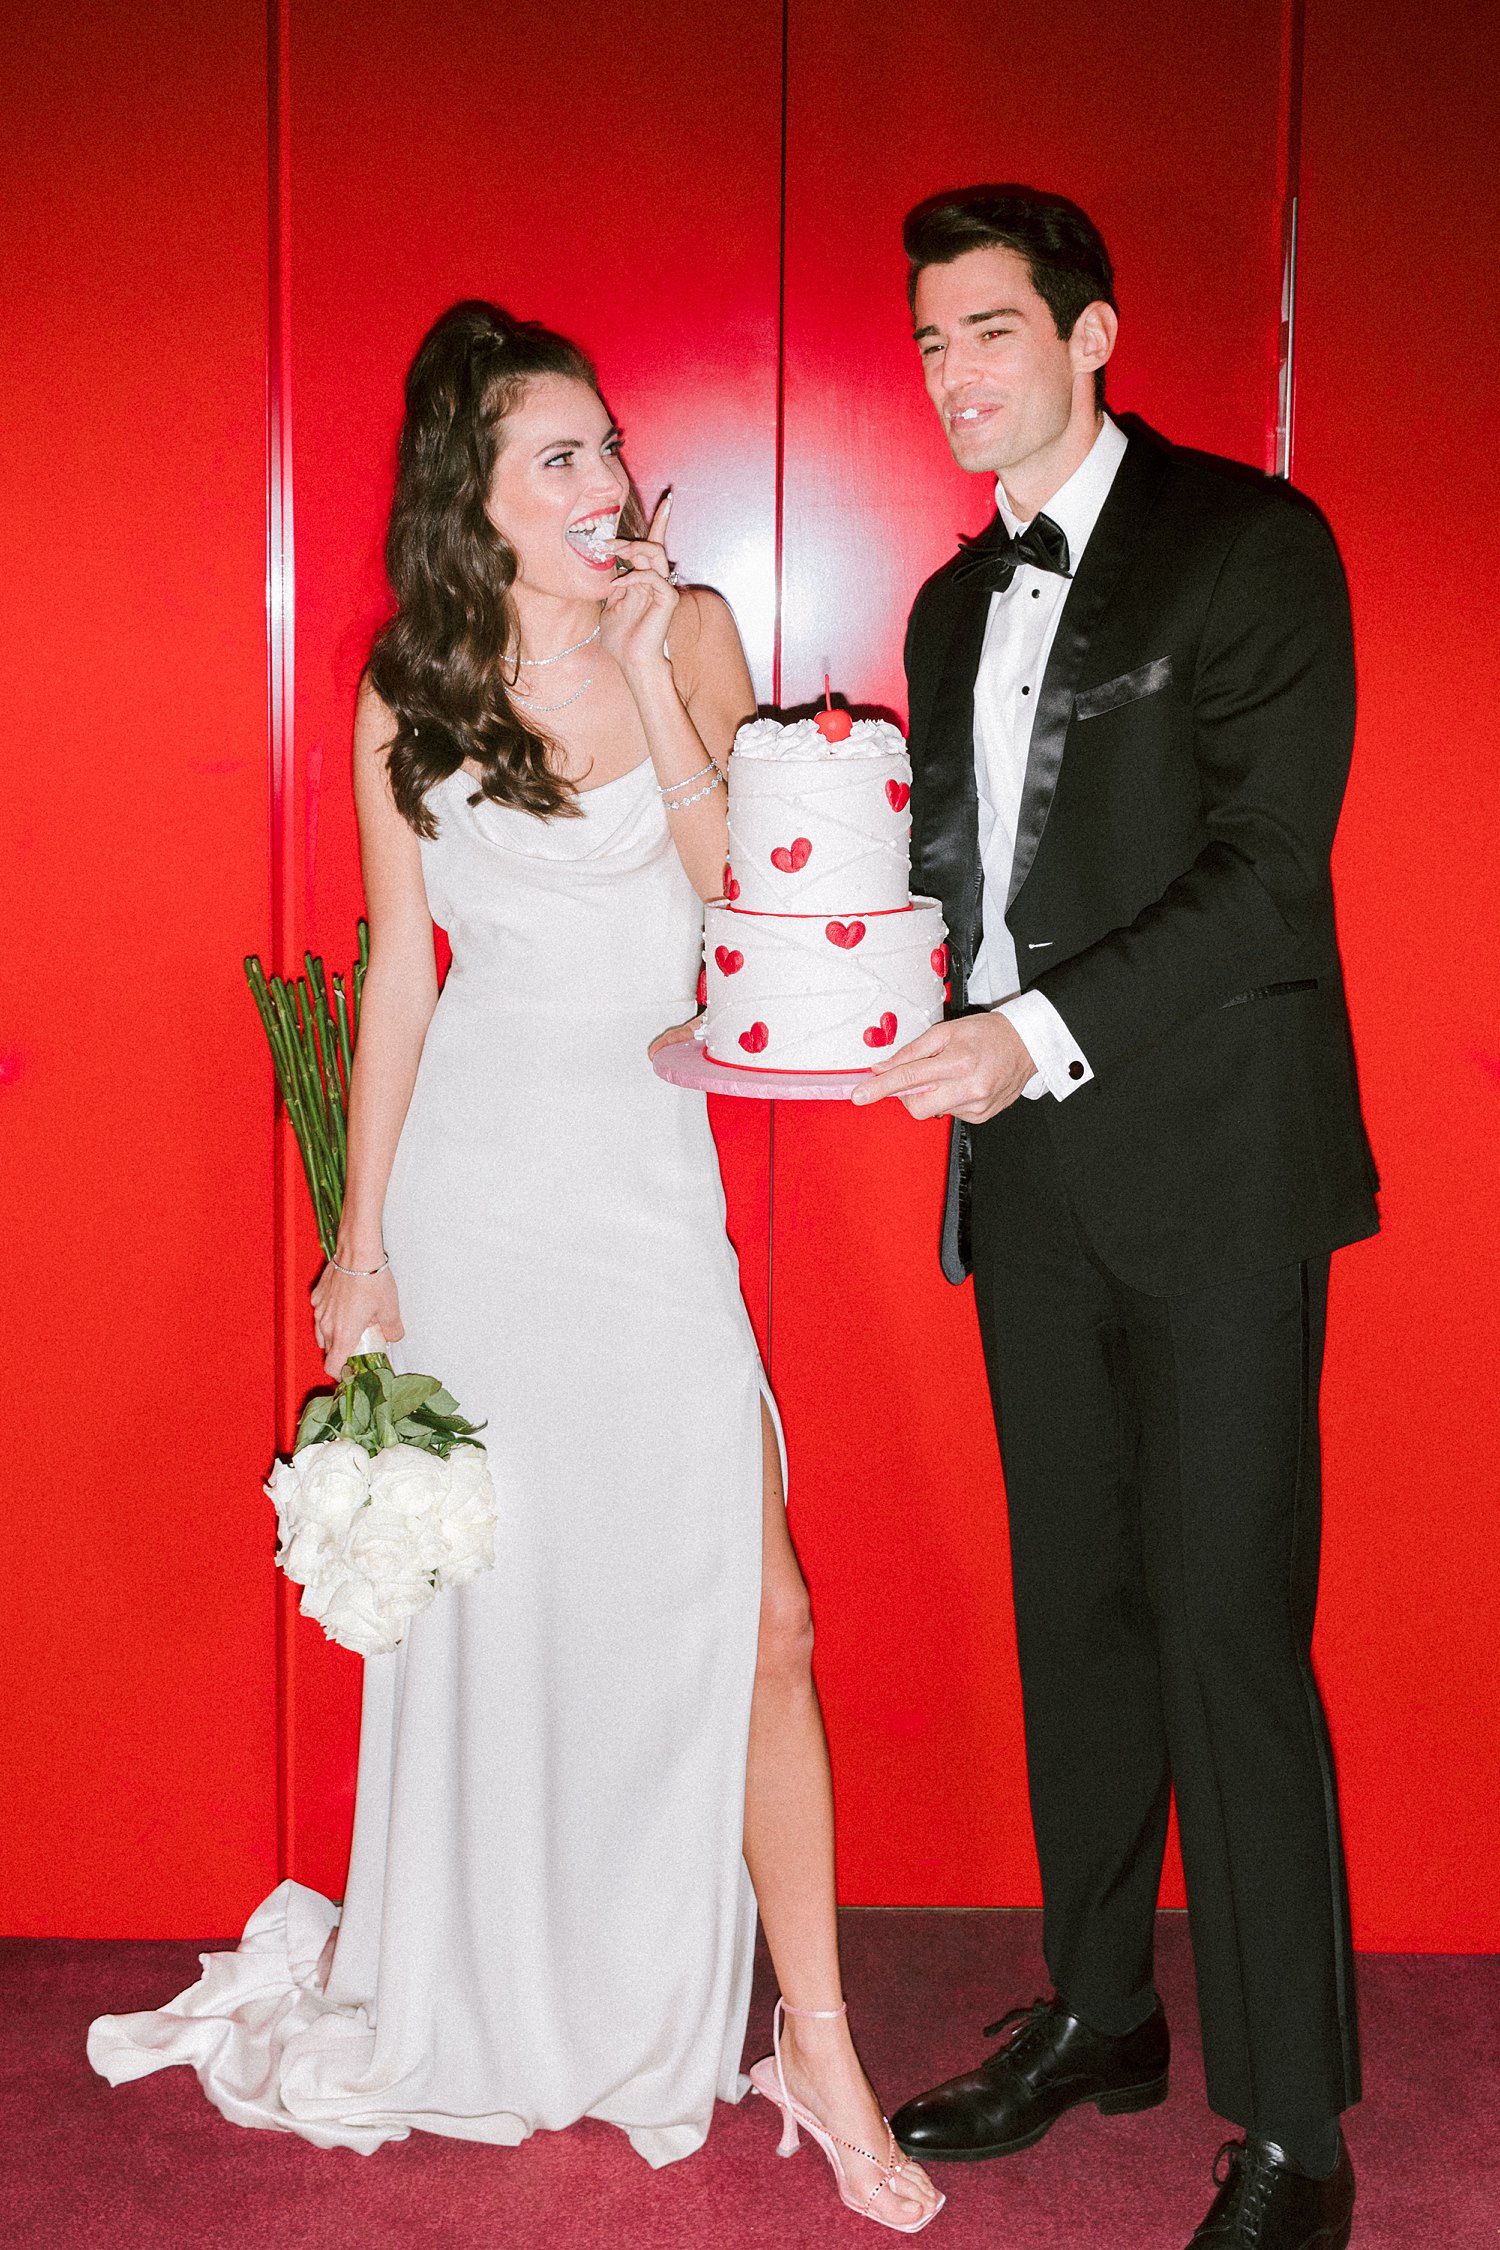 Man in black tuxedo and bowtie standing with cake in hands next to laughing woman in white dress holding flower bouquet in red elevator Virgin Hotel Dallas